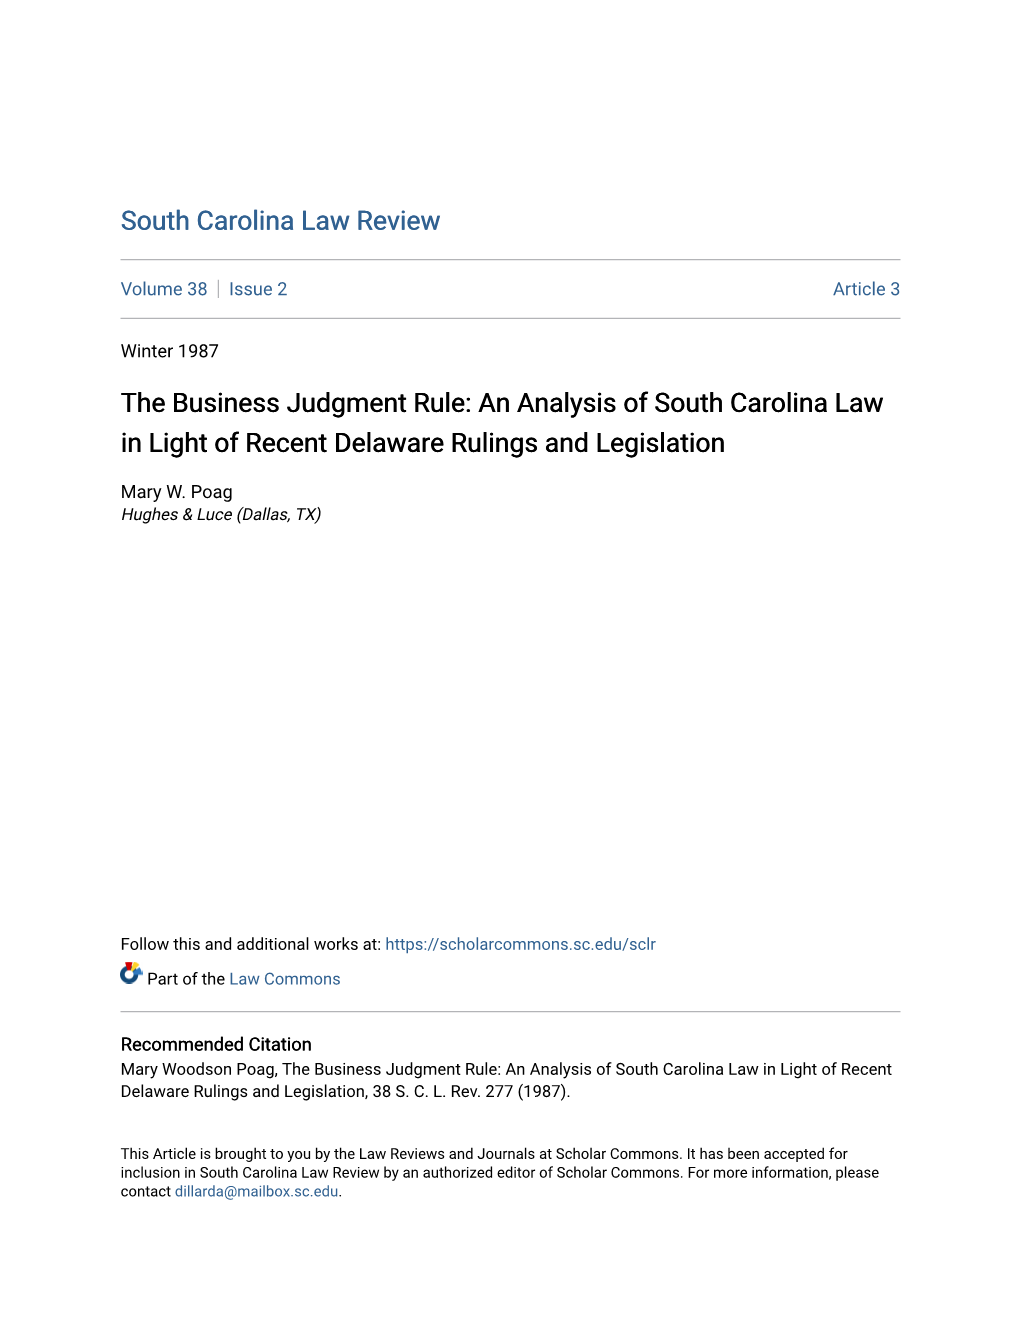 The Business Judgment Rule: an Analysis of South Carolina Law in Light of Recent Delaware Rulings and Legislation